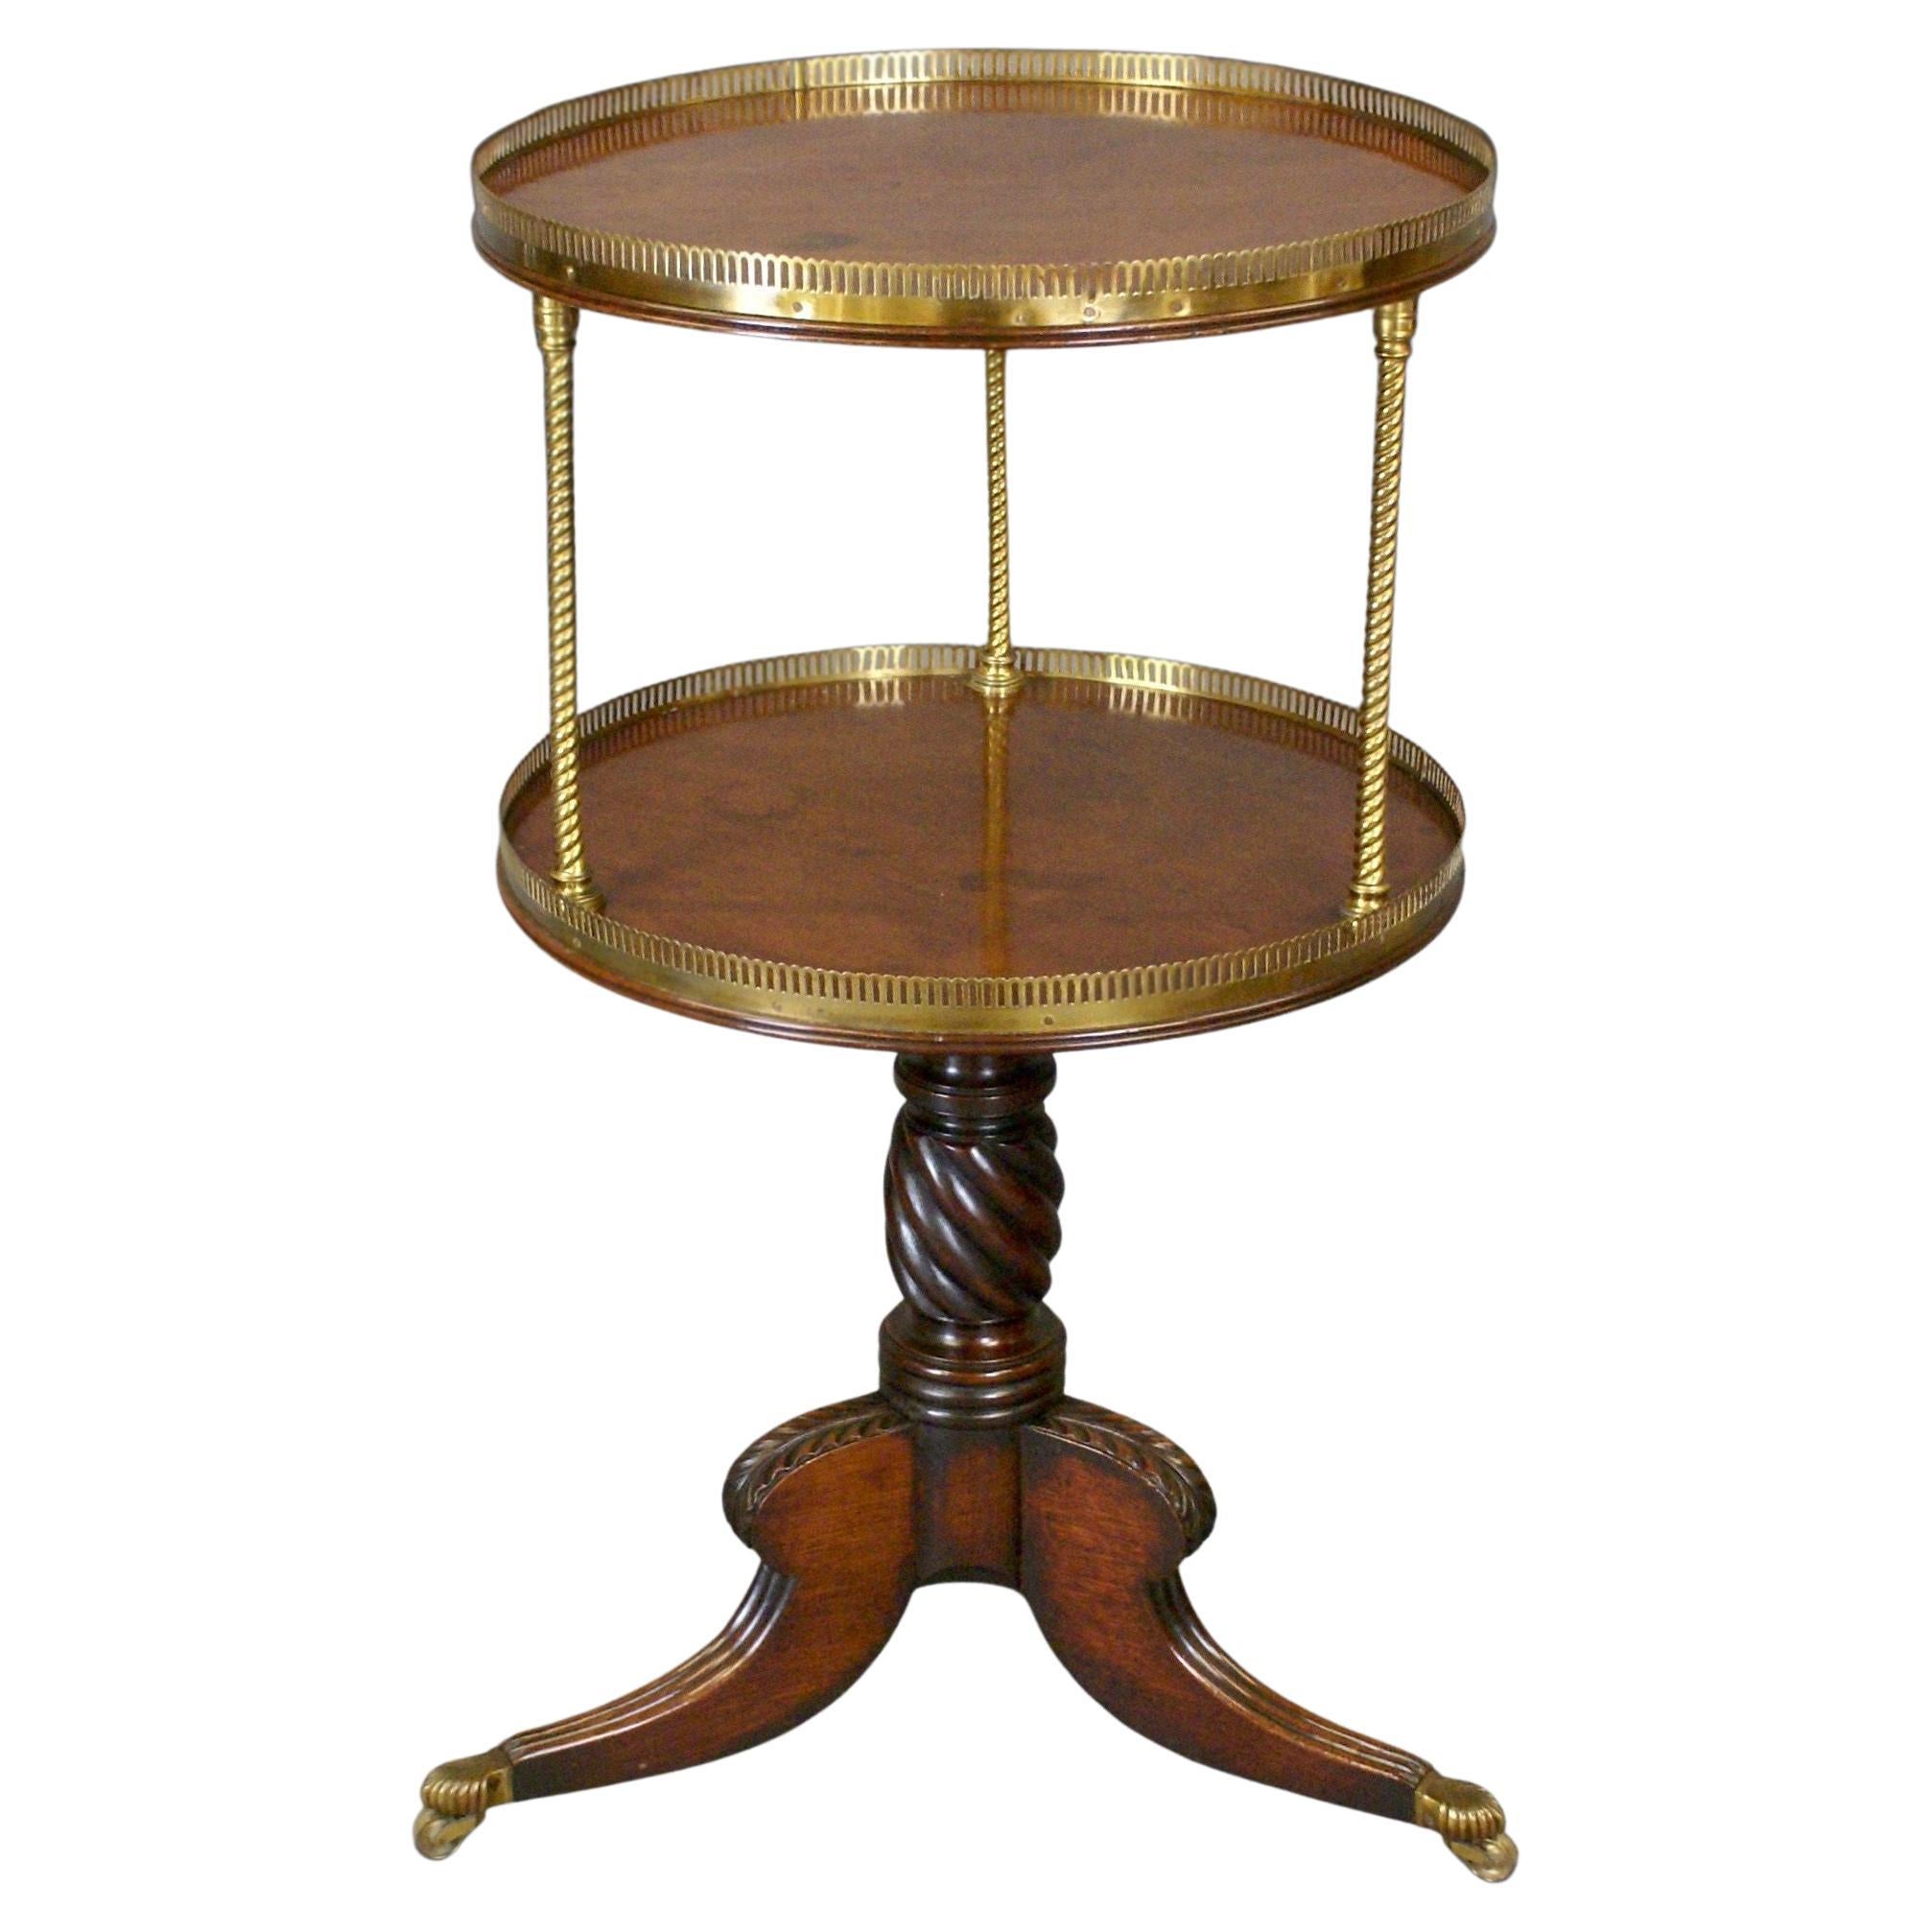 Unusual and Attractive Regency Period Mahogany Dumb Waiter For Sale